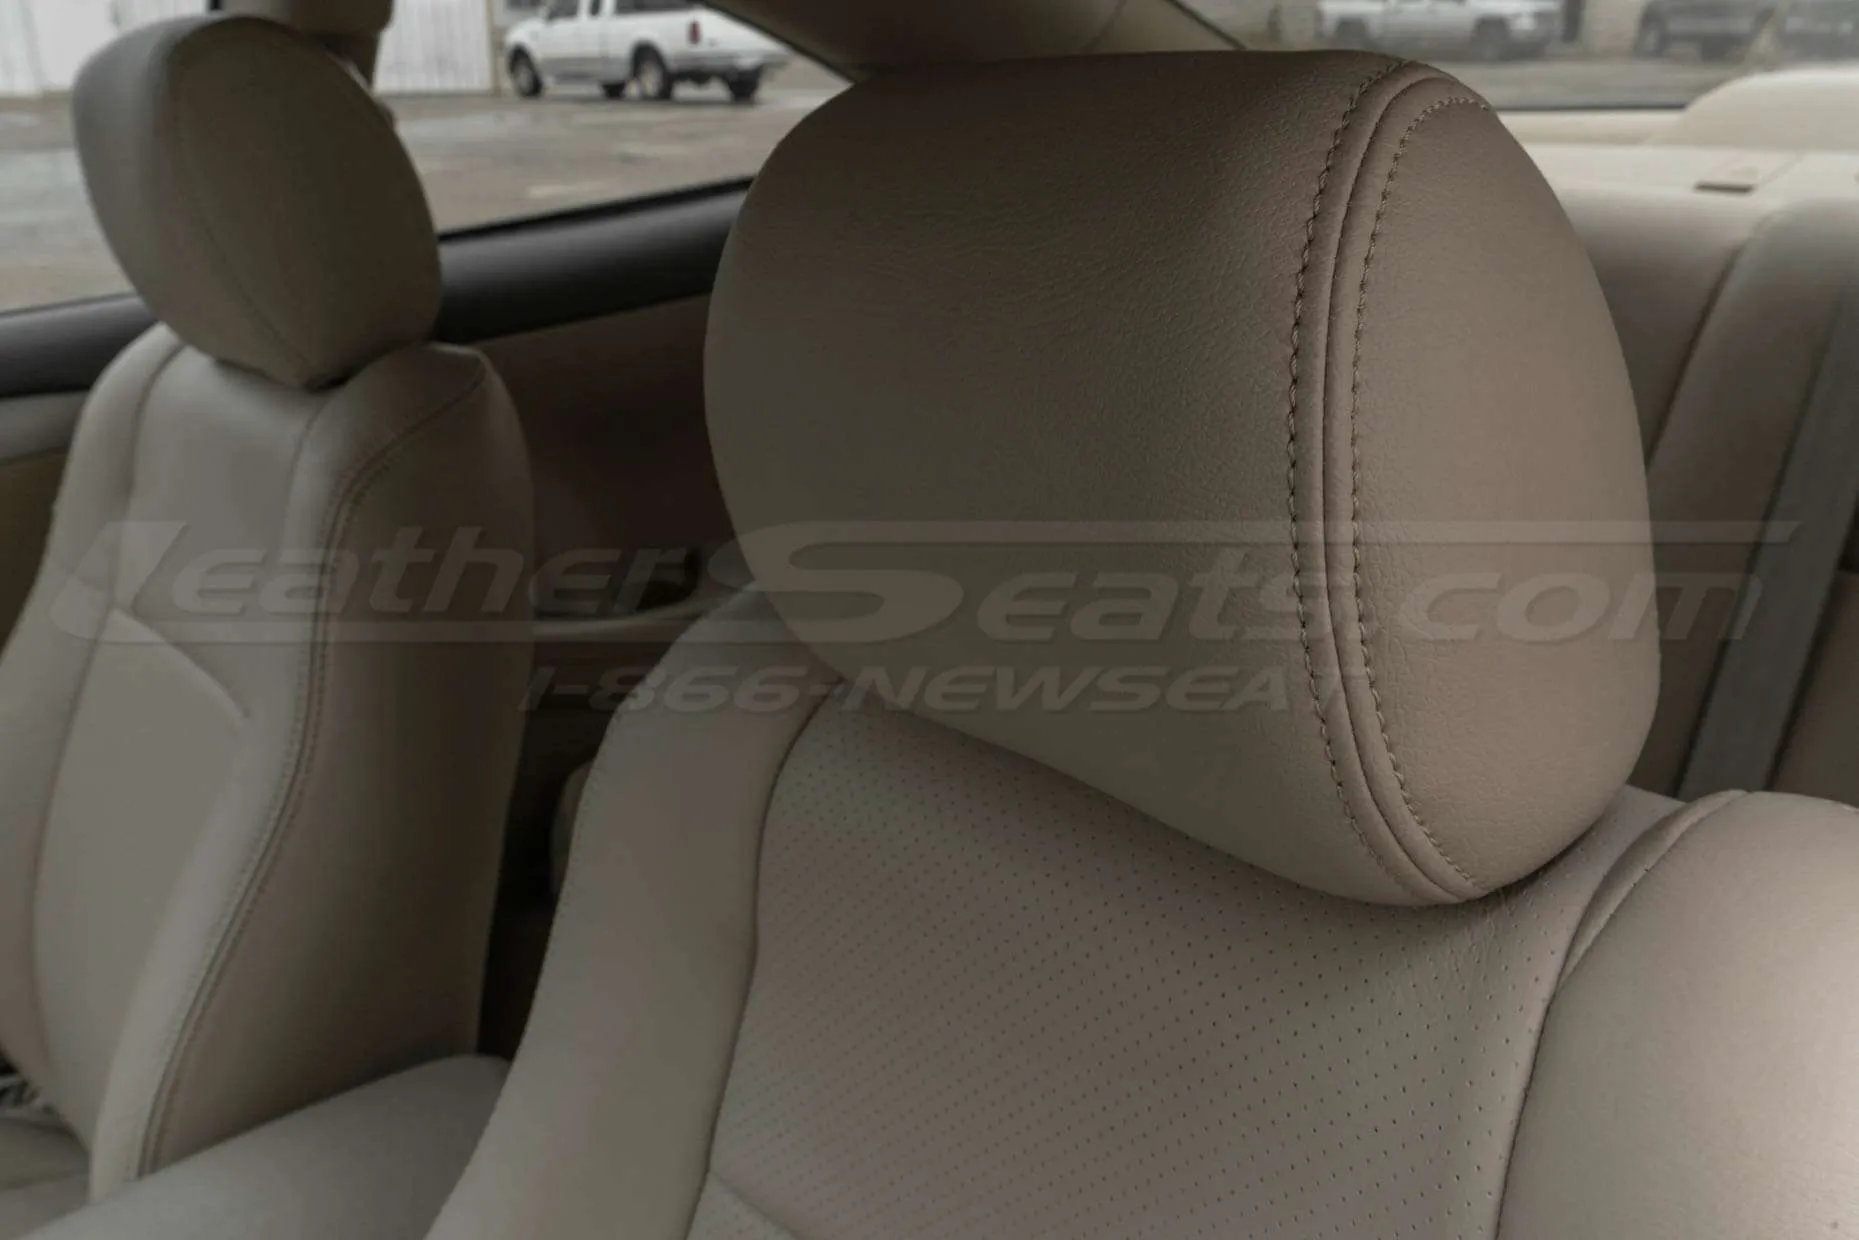 04-09 Toyota Solara Installed Leather Seats - Ivory - Front driver's headrest with matching stitching